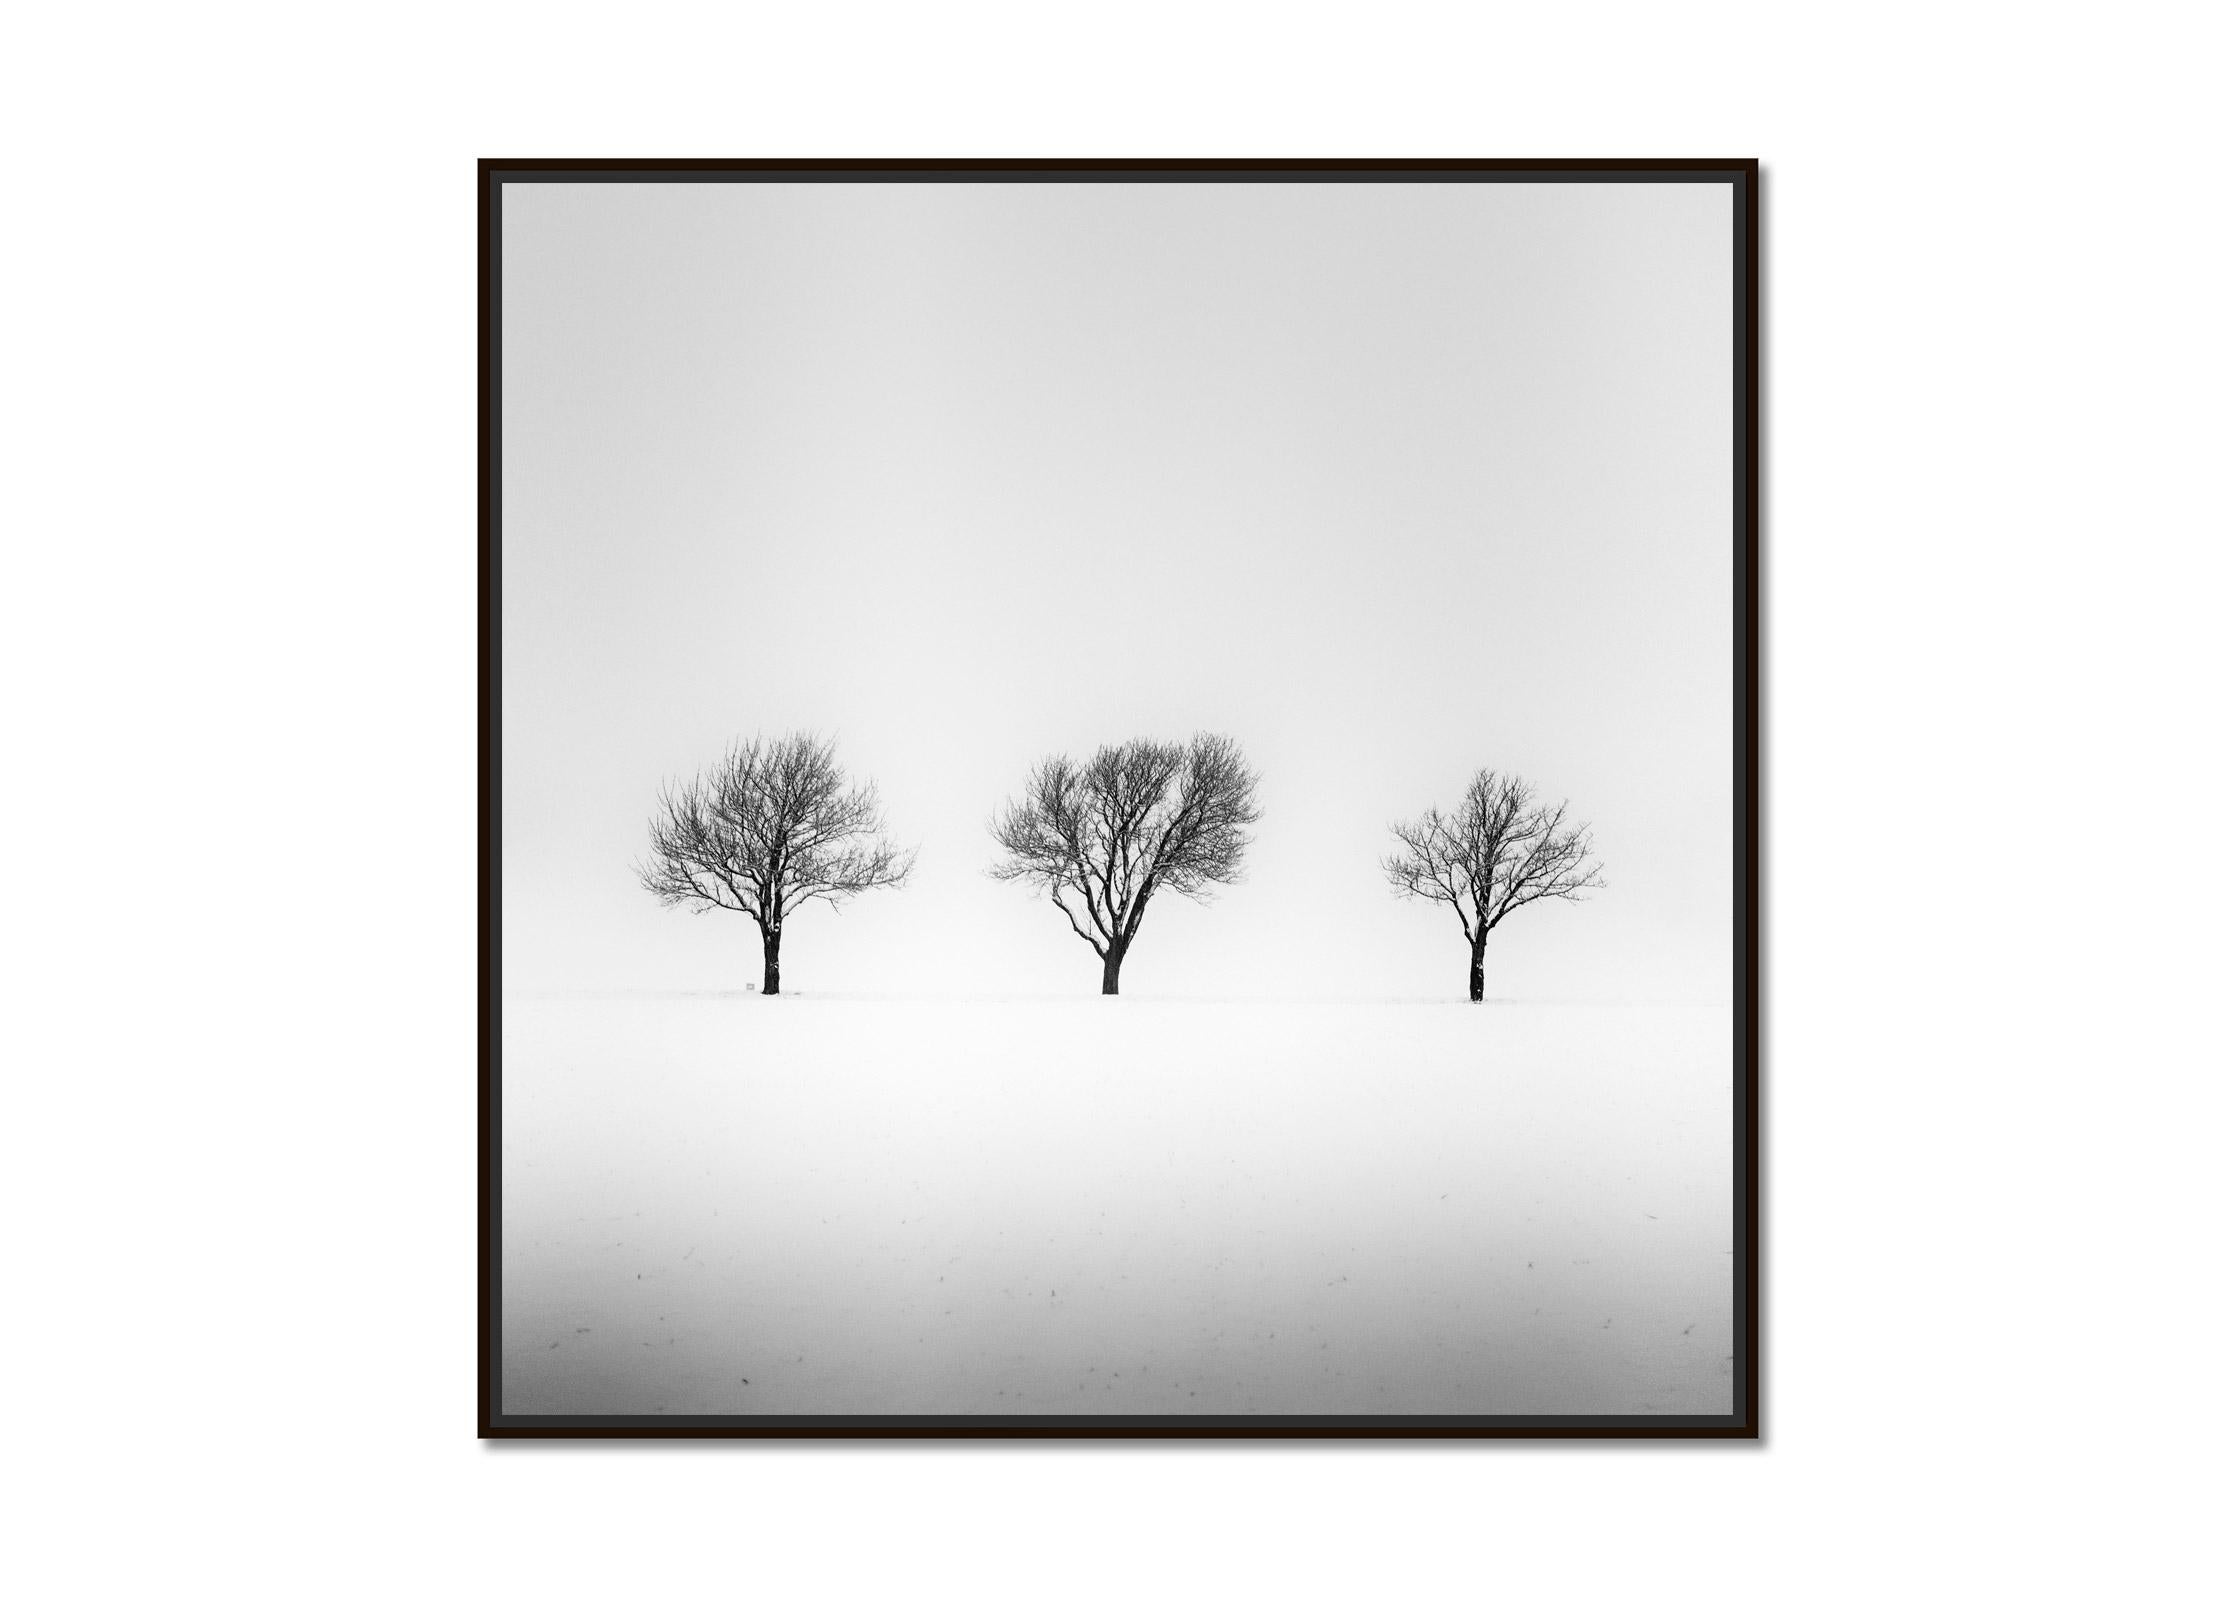 Trees in snowy Field, winter, snow, black and white photography, landscape - Photograph by Gerald Berghammer